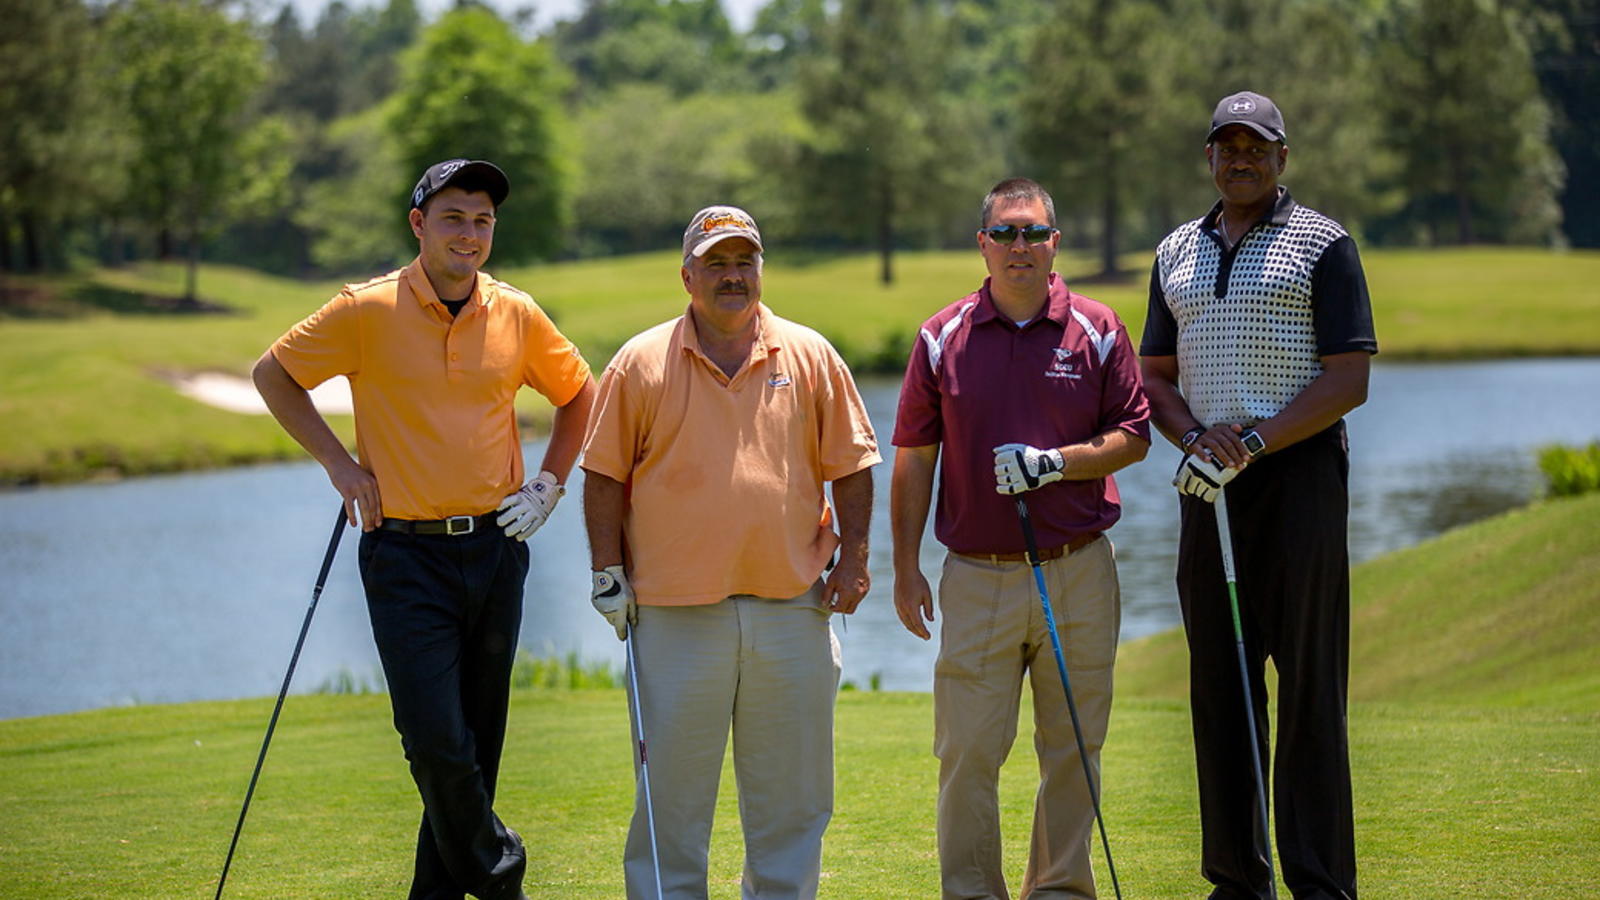 NCCU alumni posing for photo on the golf course, dressed in golfing apparel.